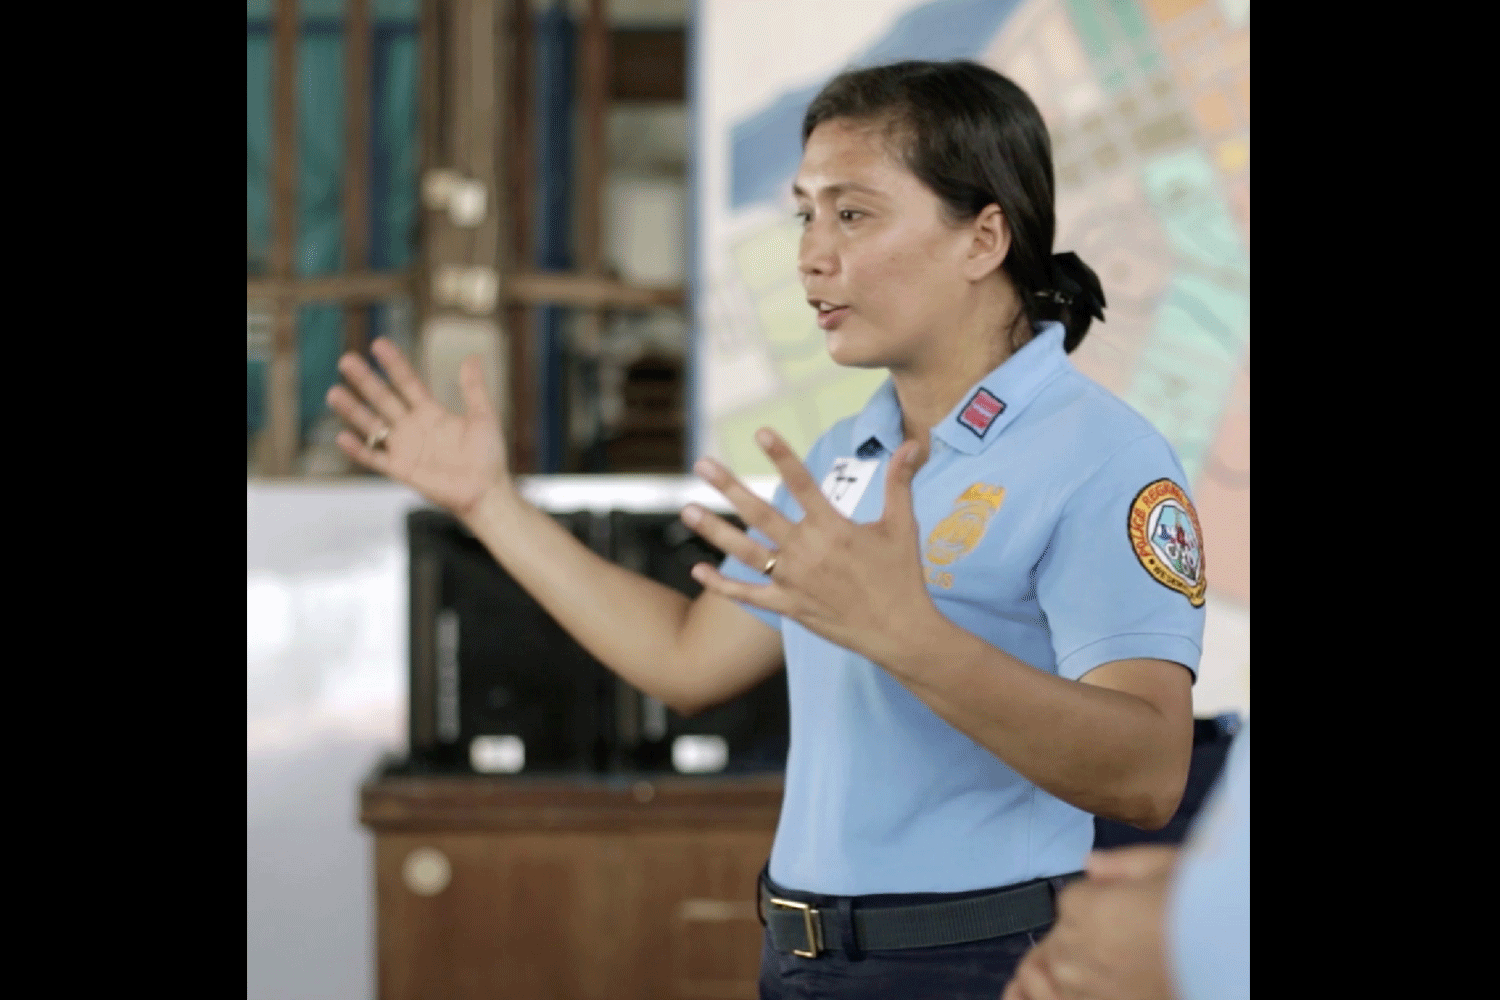 Meet TJ. She is not your average policewoman. She sees the good in people, and has gone out of her way to understand and protect children in conflict with the law.